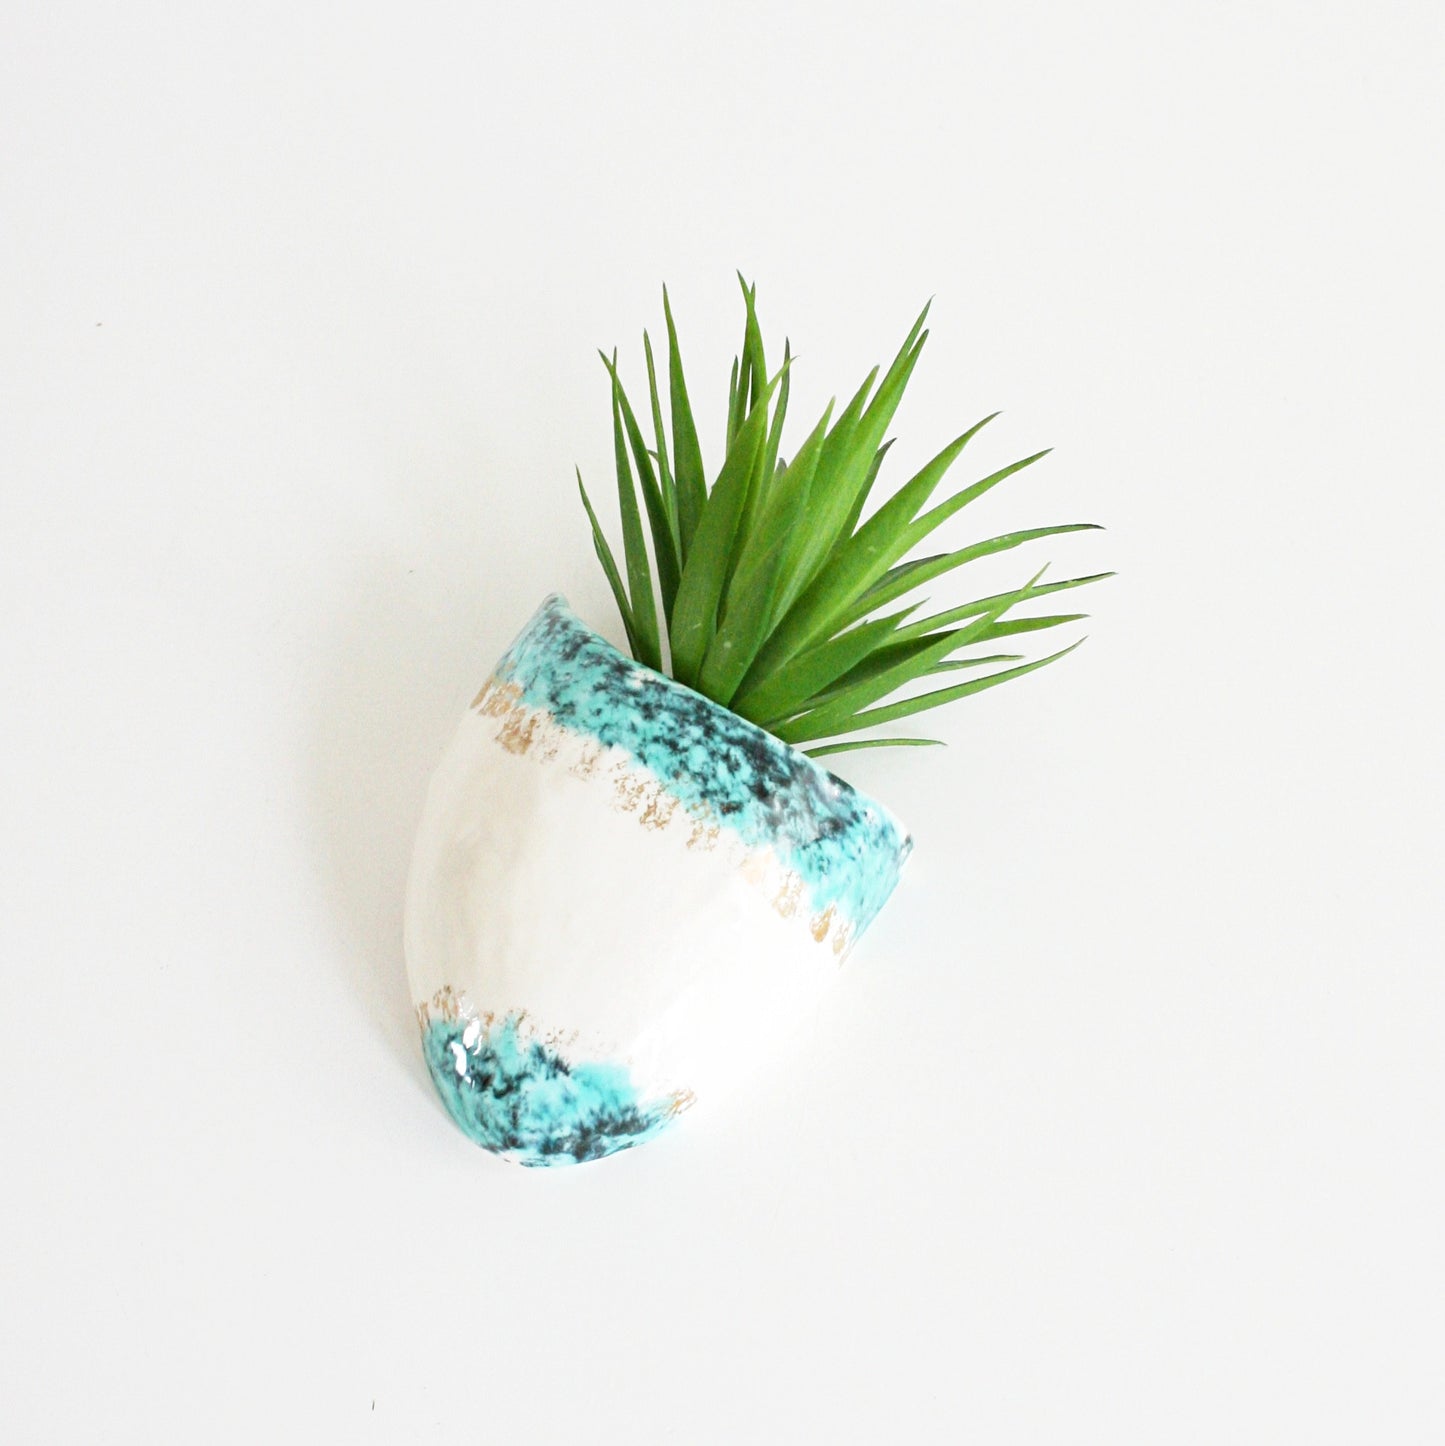 SOLD - Mid Century Modern White Turquoise and Gold Wall Pocket / Vintage Atomic Wall Planter